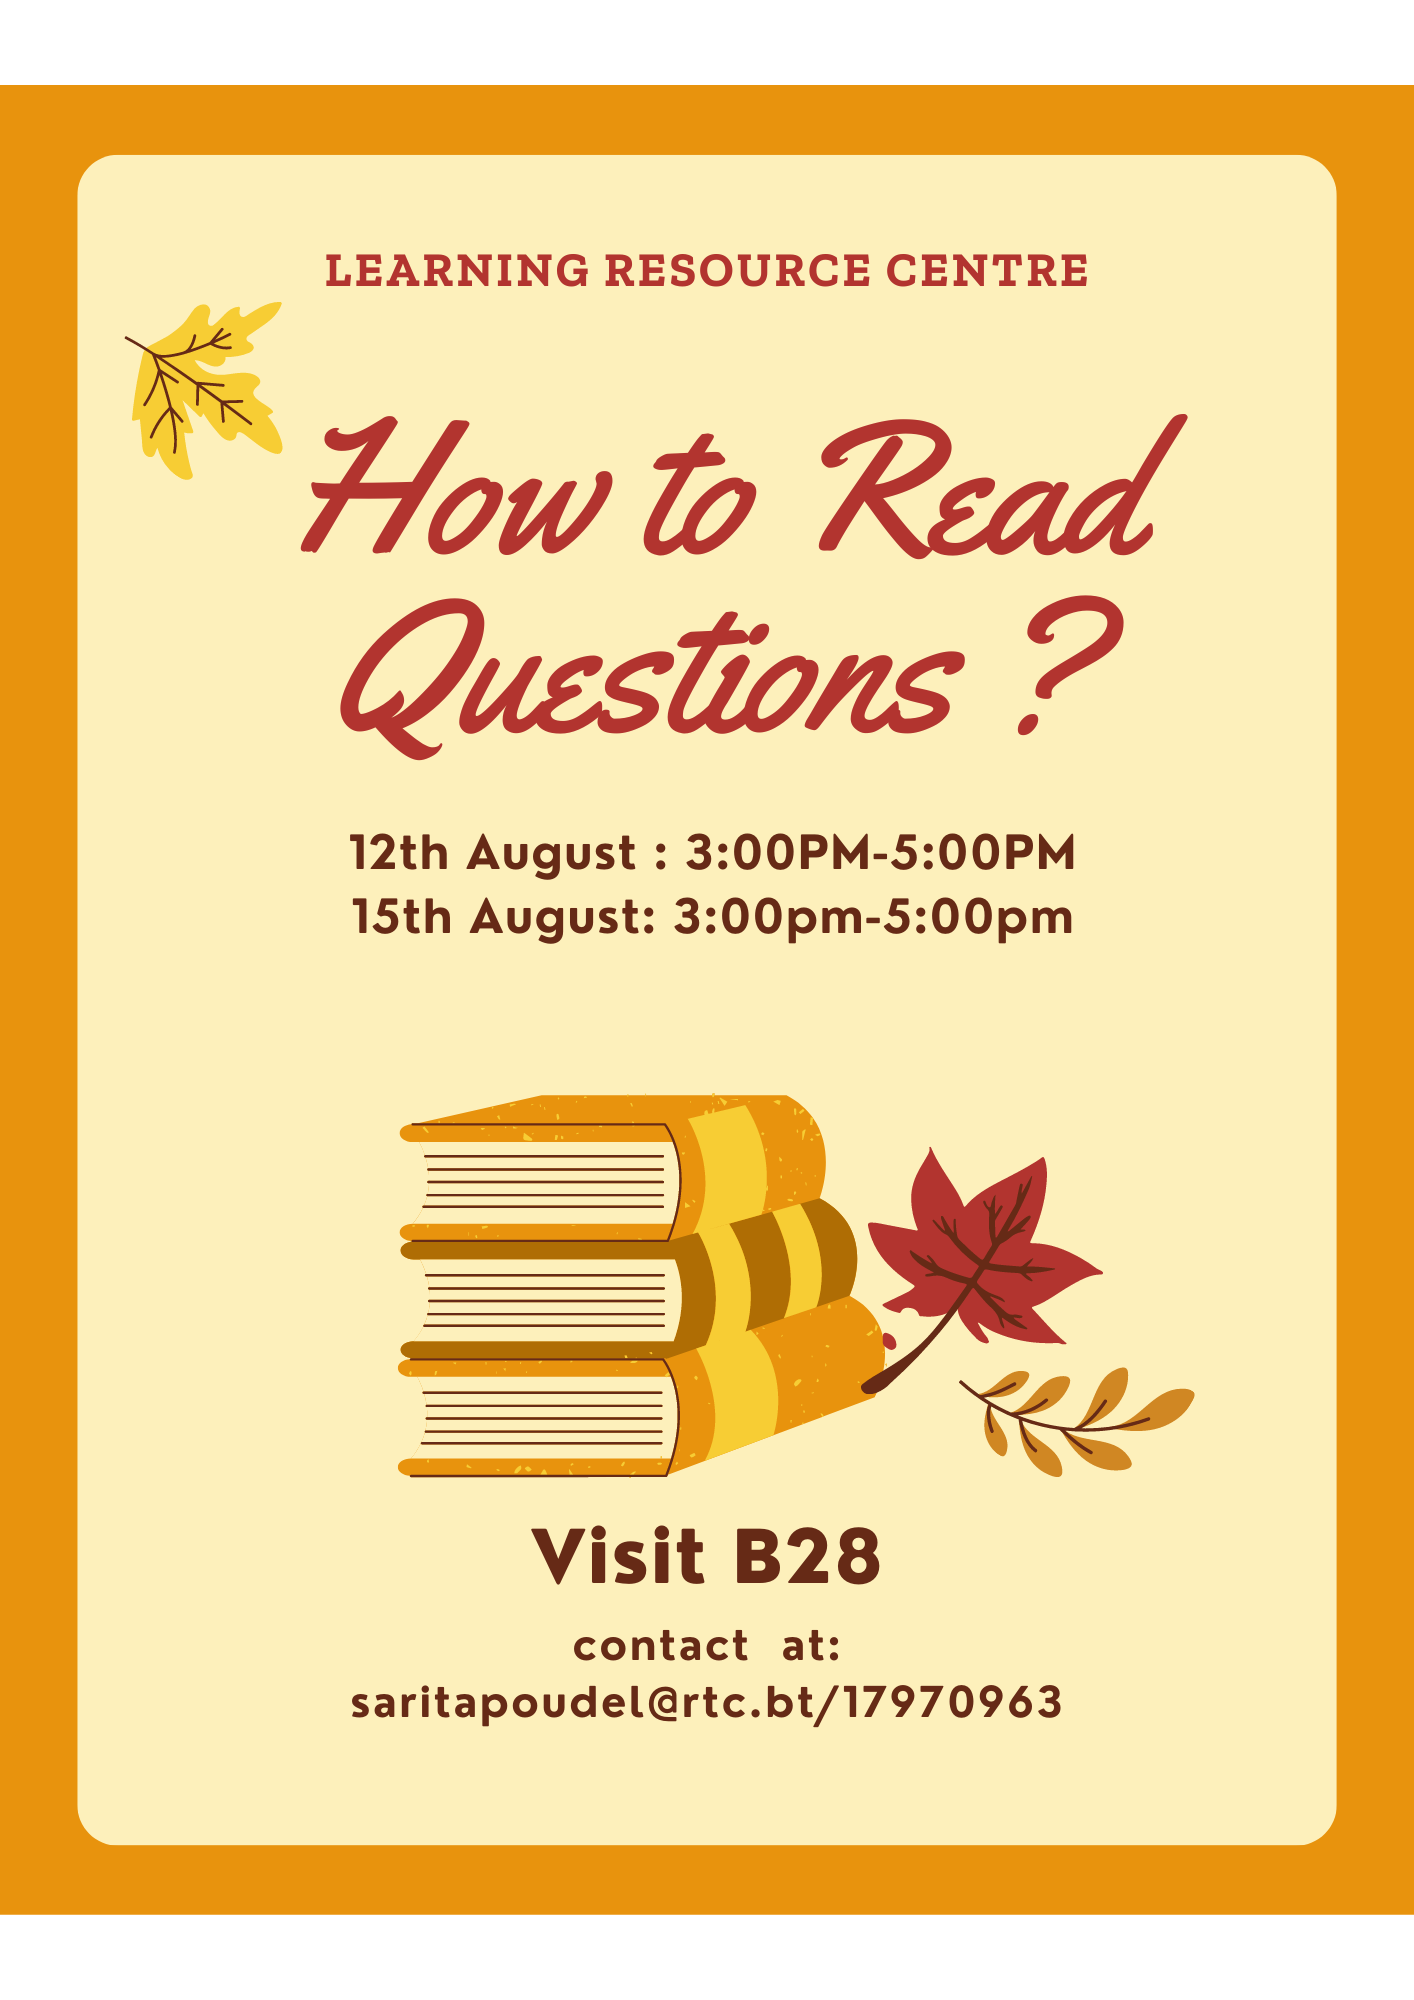 How to Read Questions Flyer